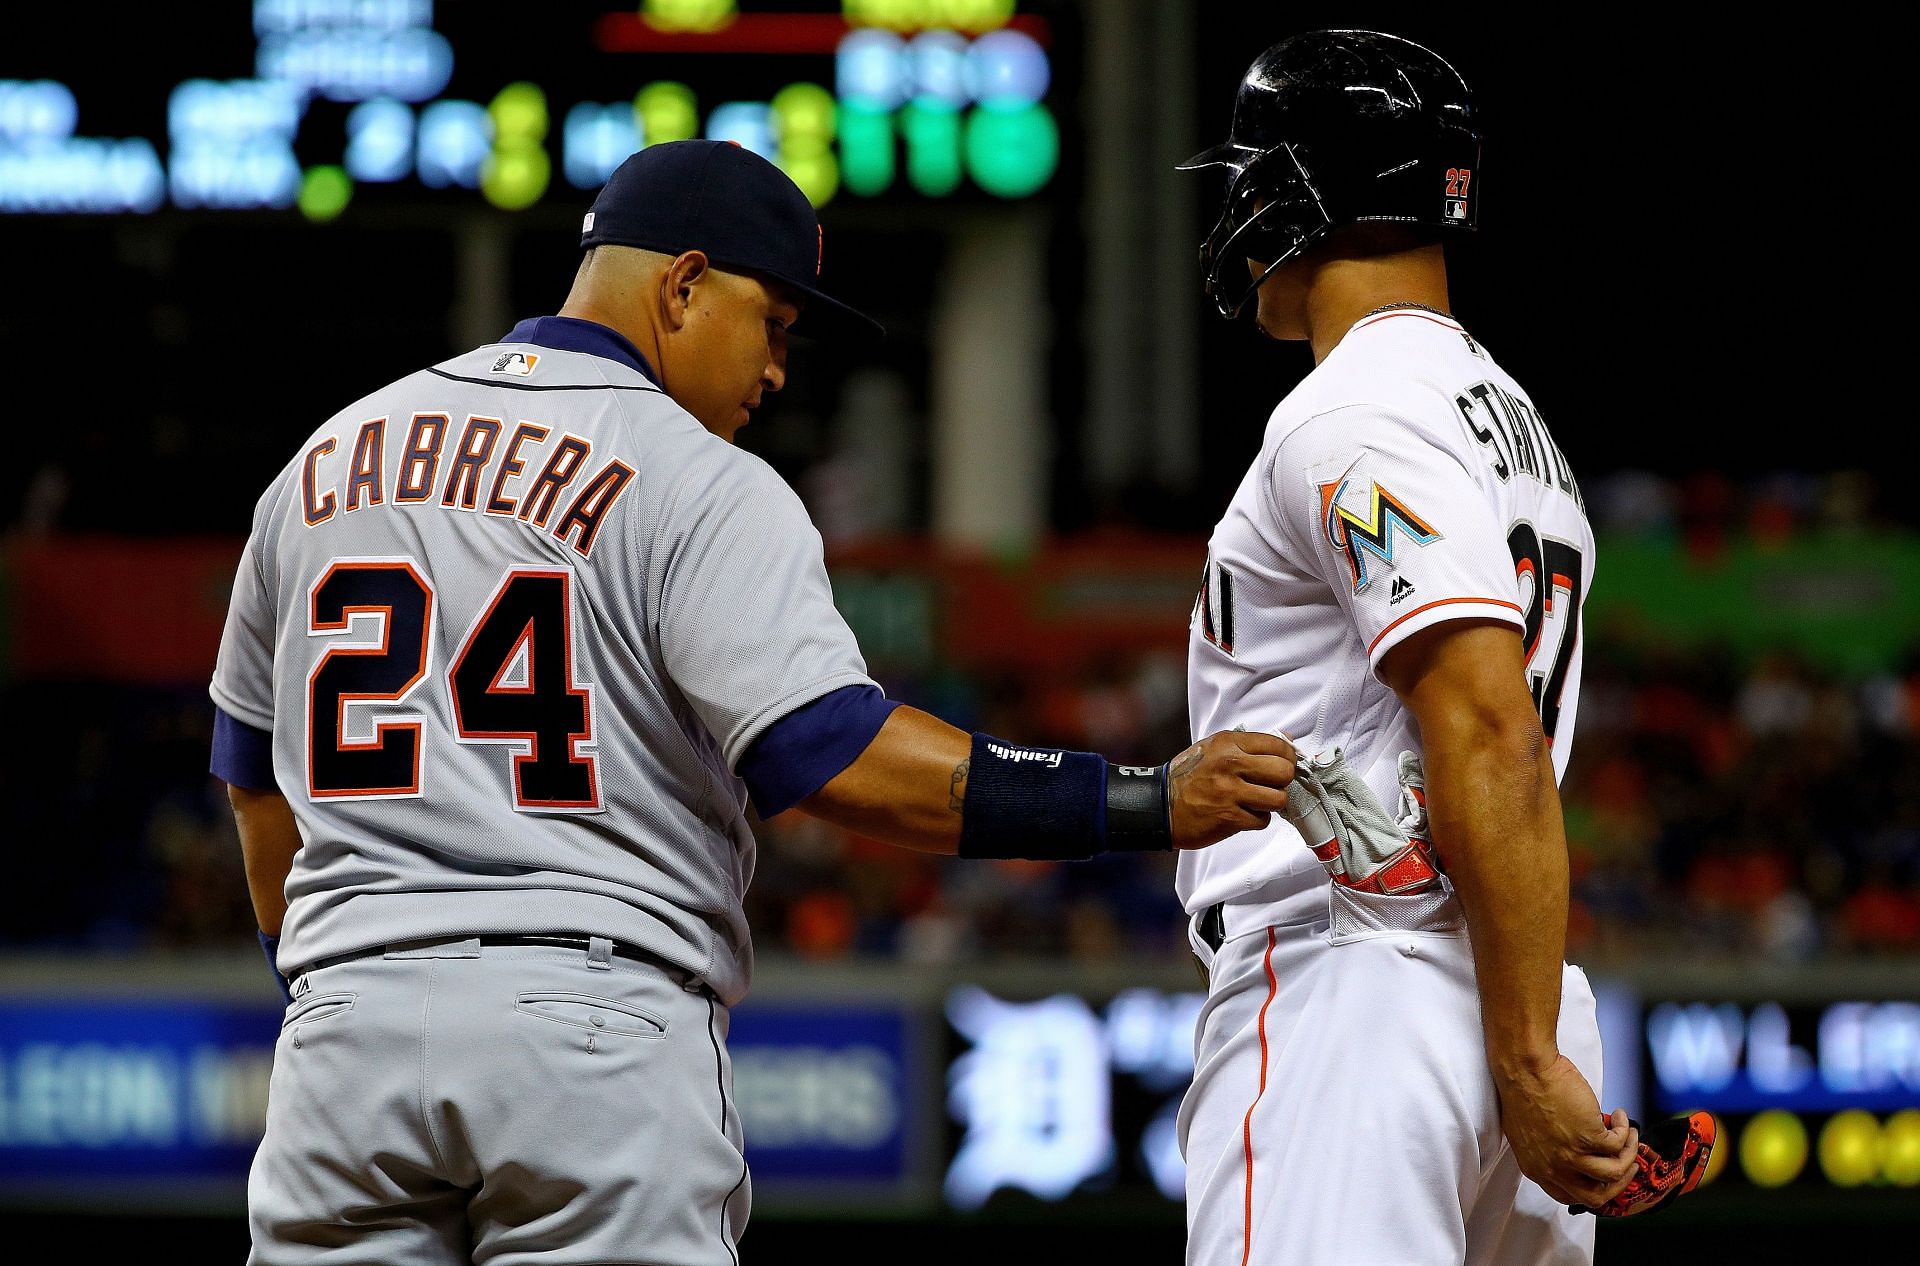 Miguel Cabrera #24 of the Detroit Tigers steals a batting glove from the pocket of Giancarlo Stanton #27 of the Miami Marlins